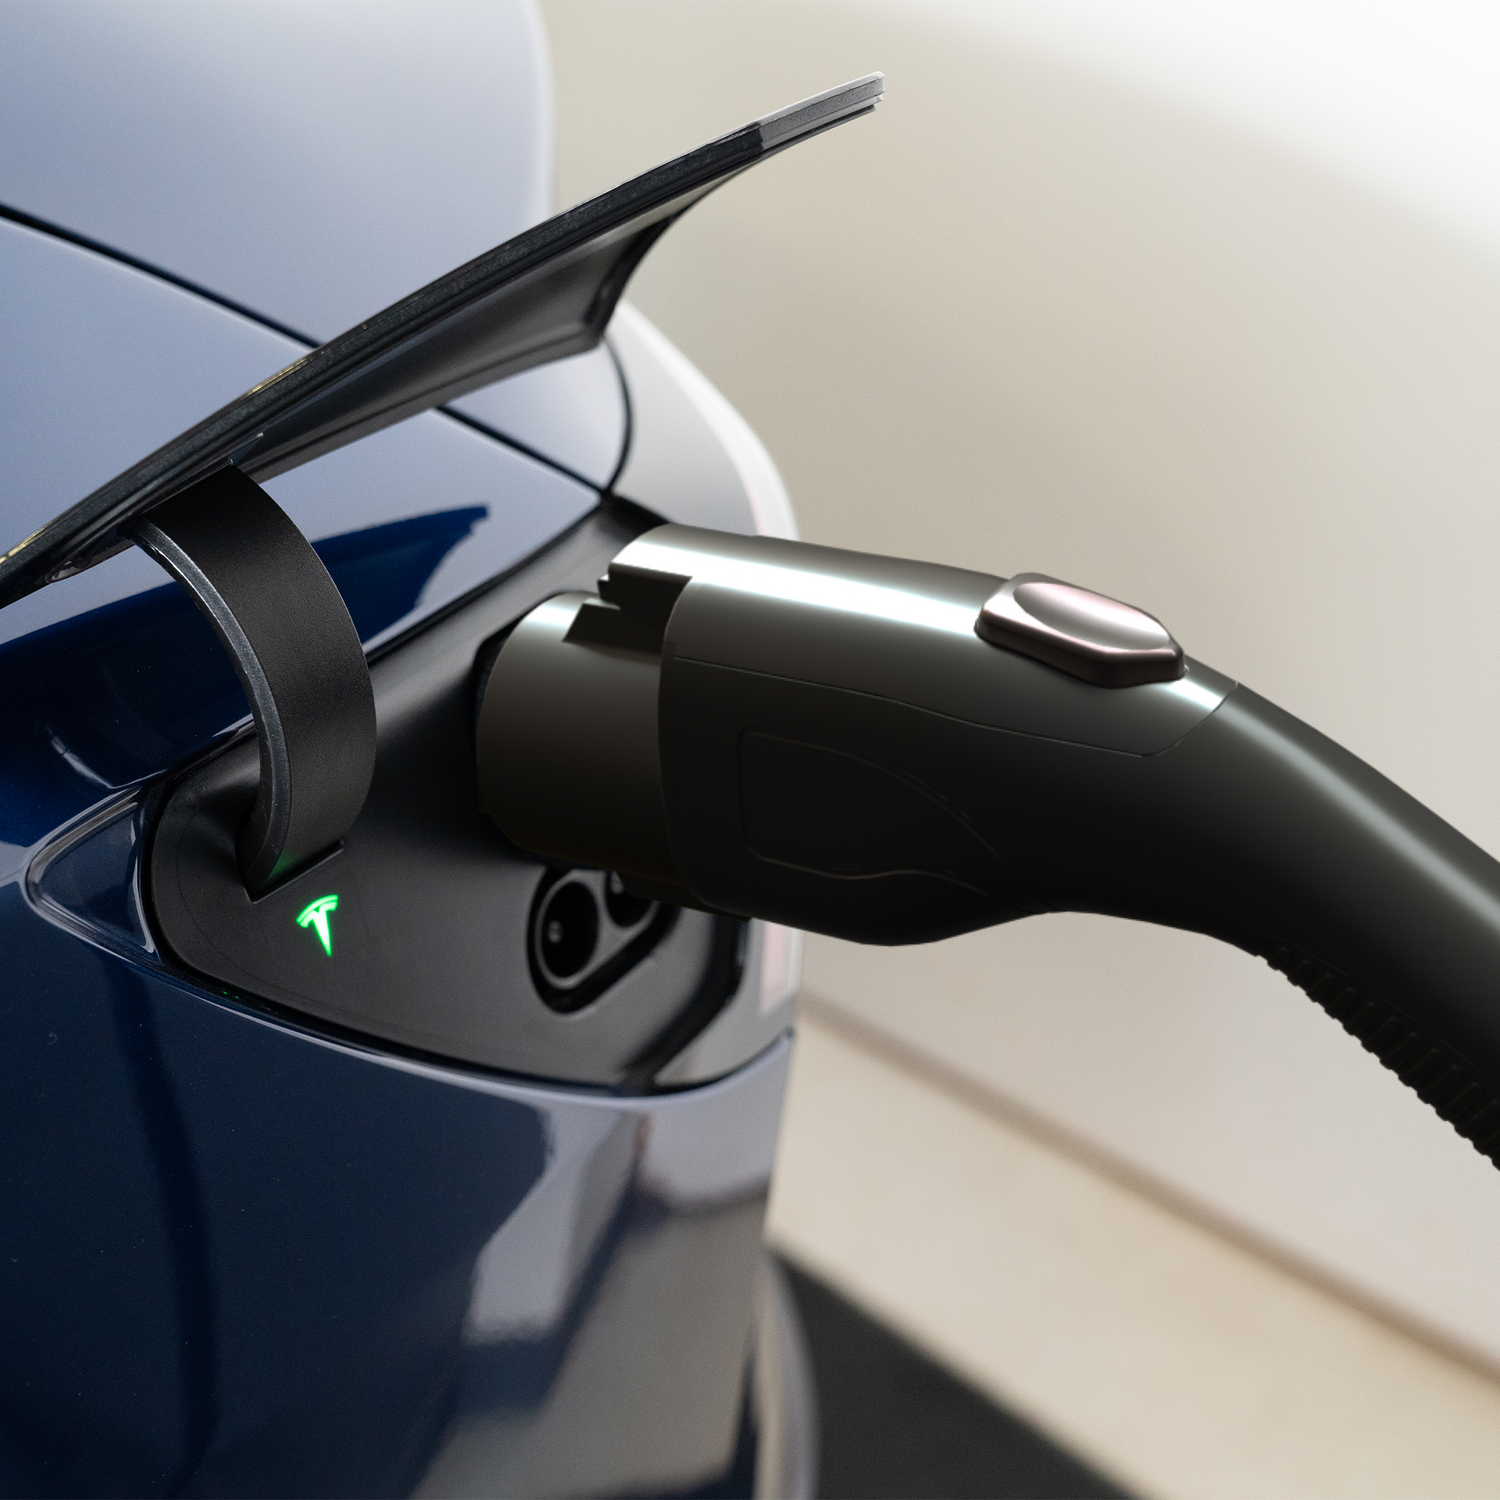 Understanding Electrical Requirements for Level 2 EV Chargers